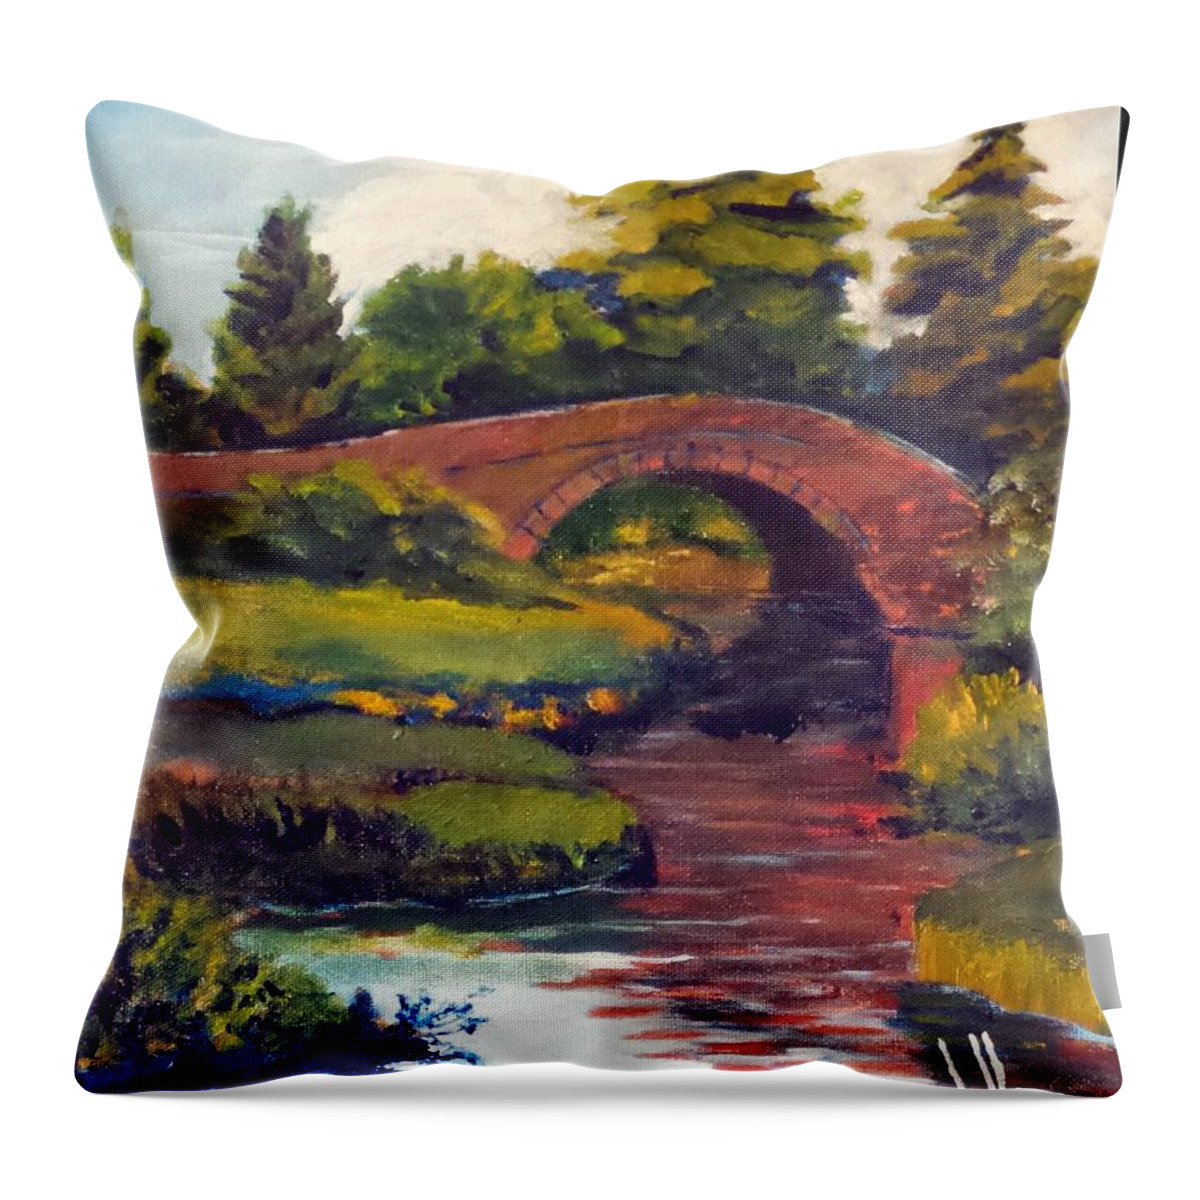 Bridge Throw Pillow featuring the painting Old Red Stone Bridge by Jim Phillips